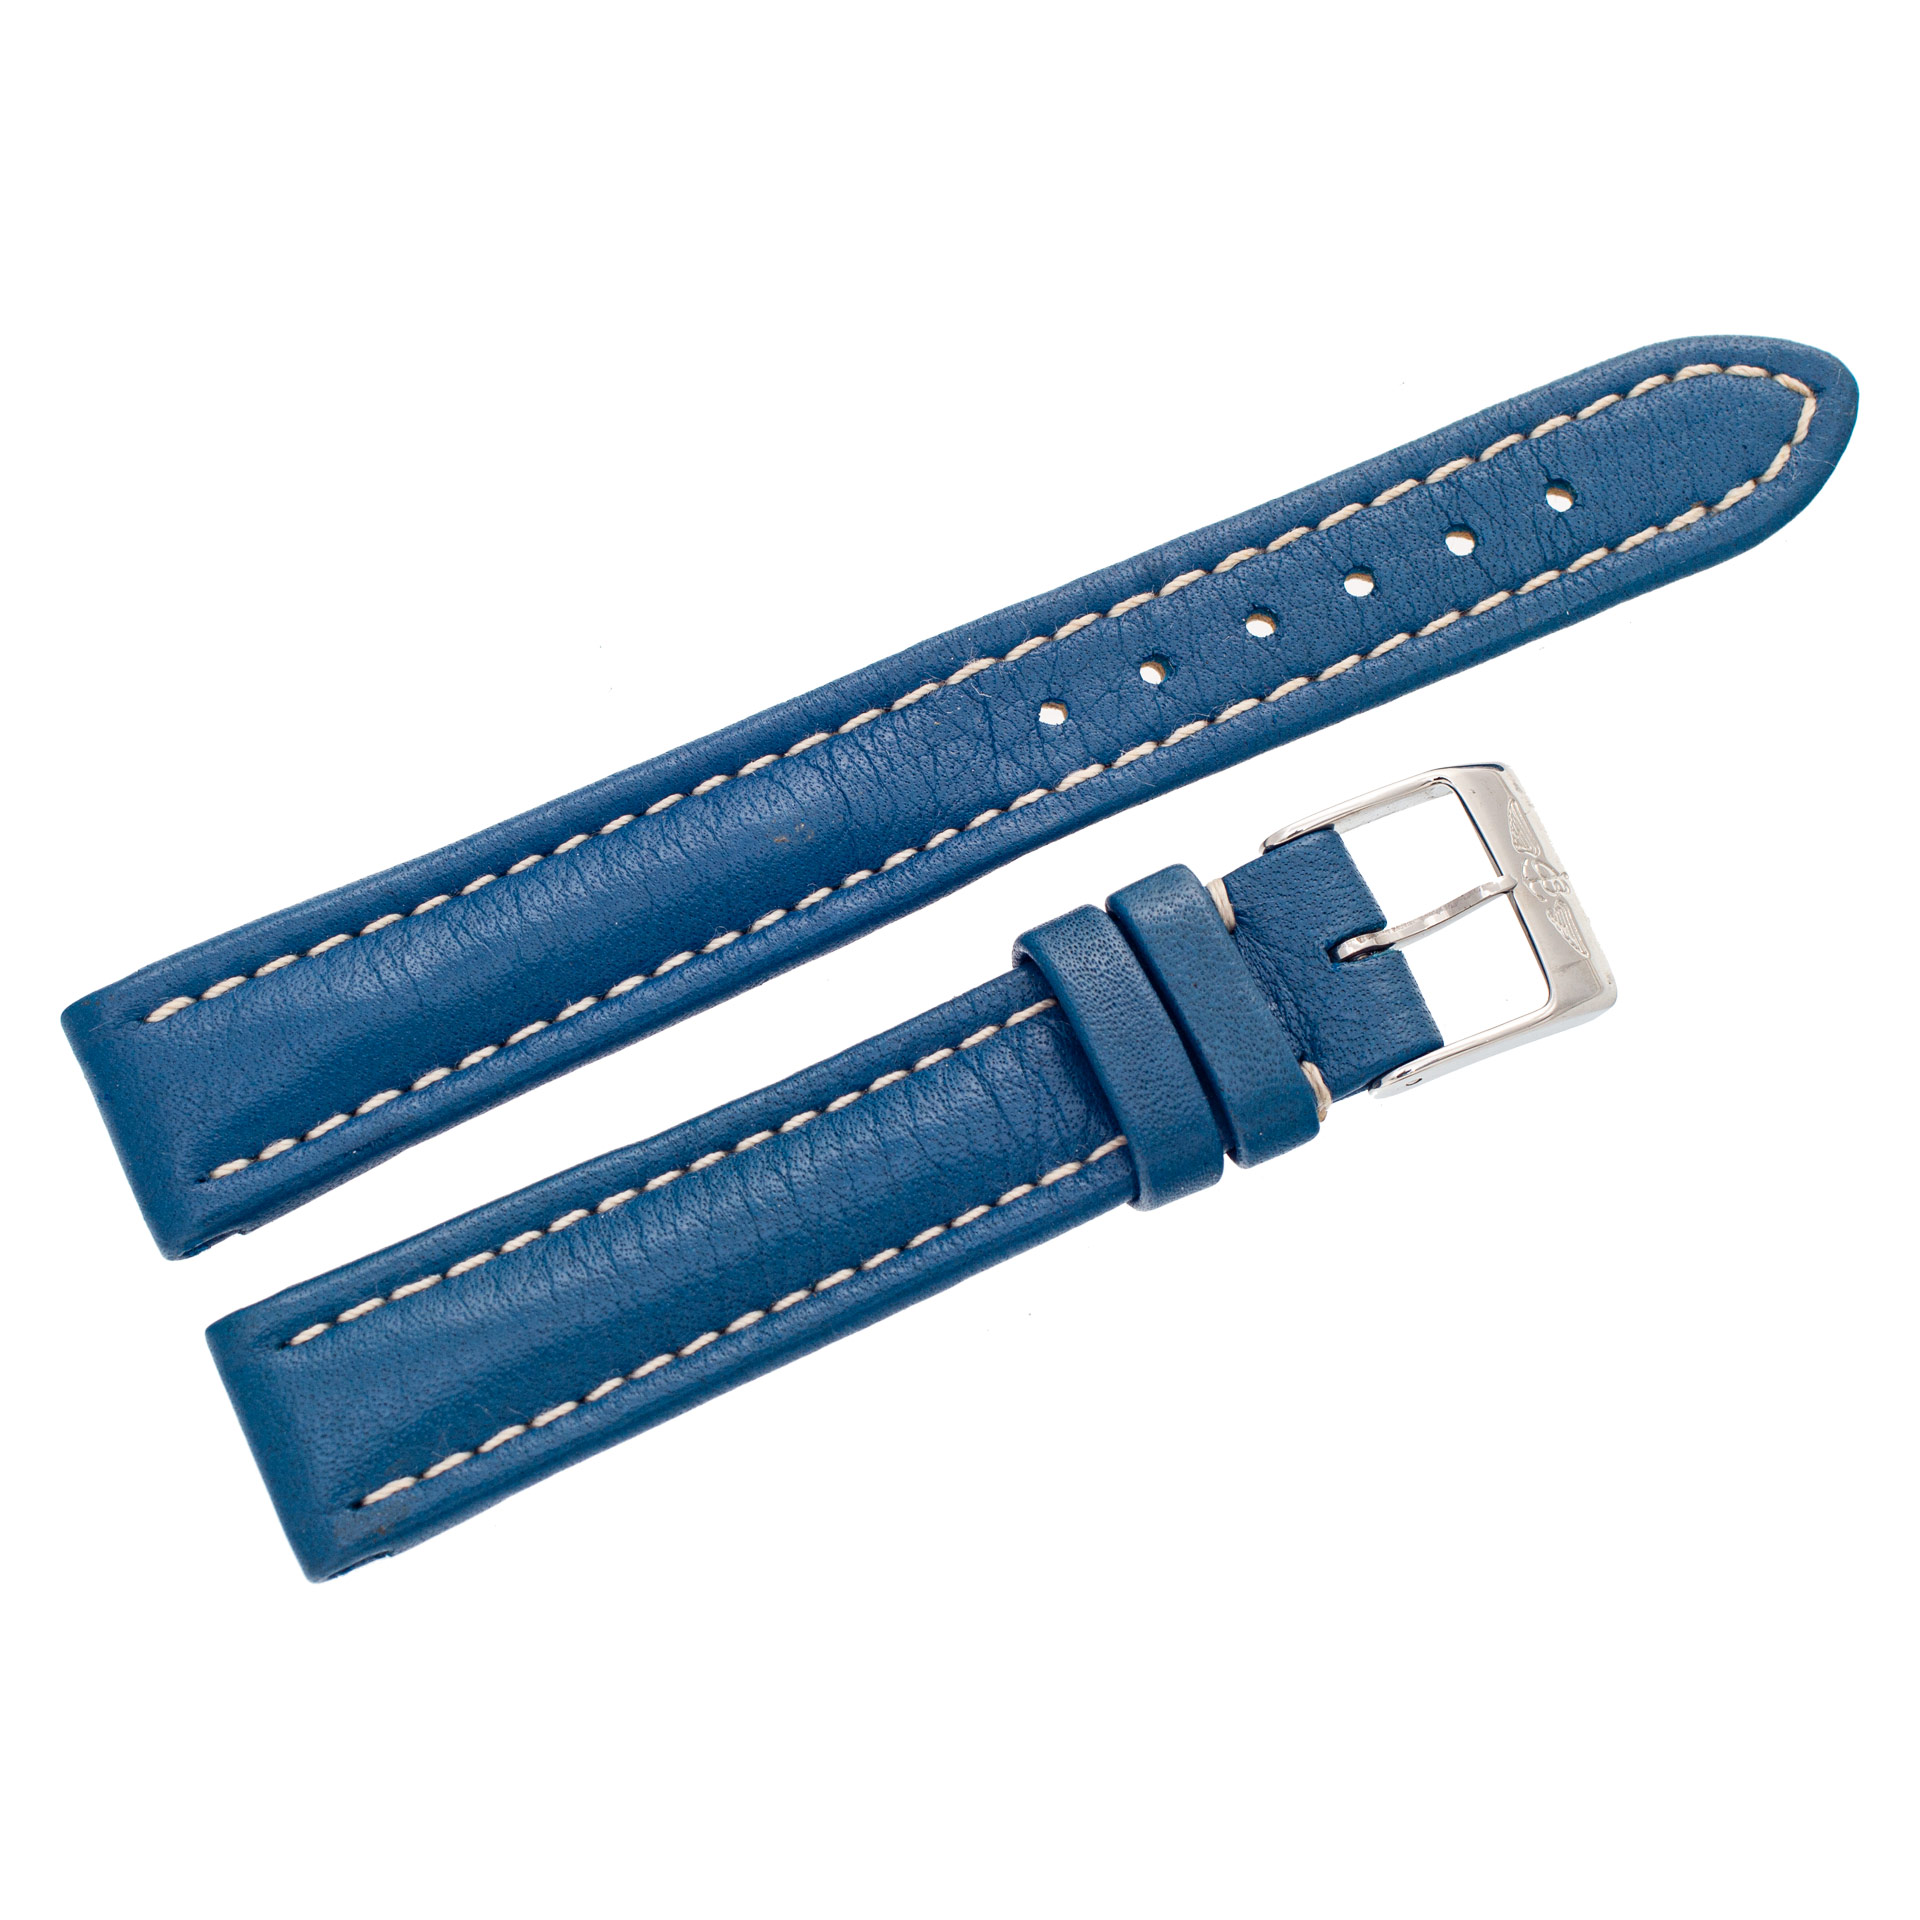 Breitling blue leather strap with white stitching and original st/s buckle (15mm x 14mm)